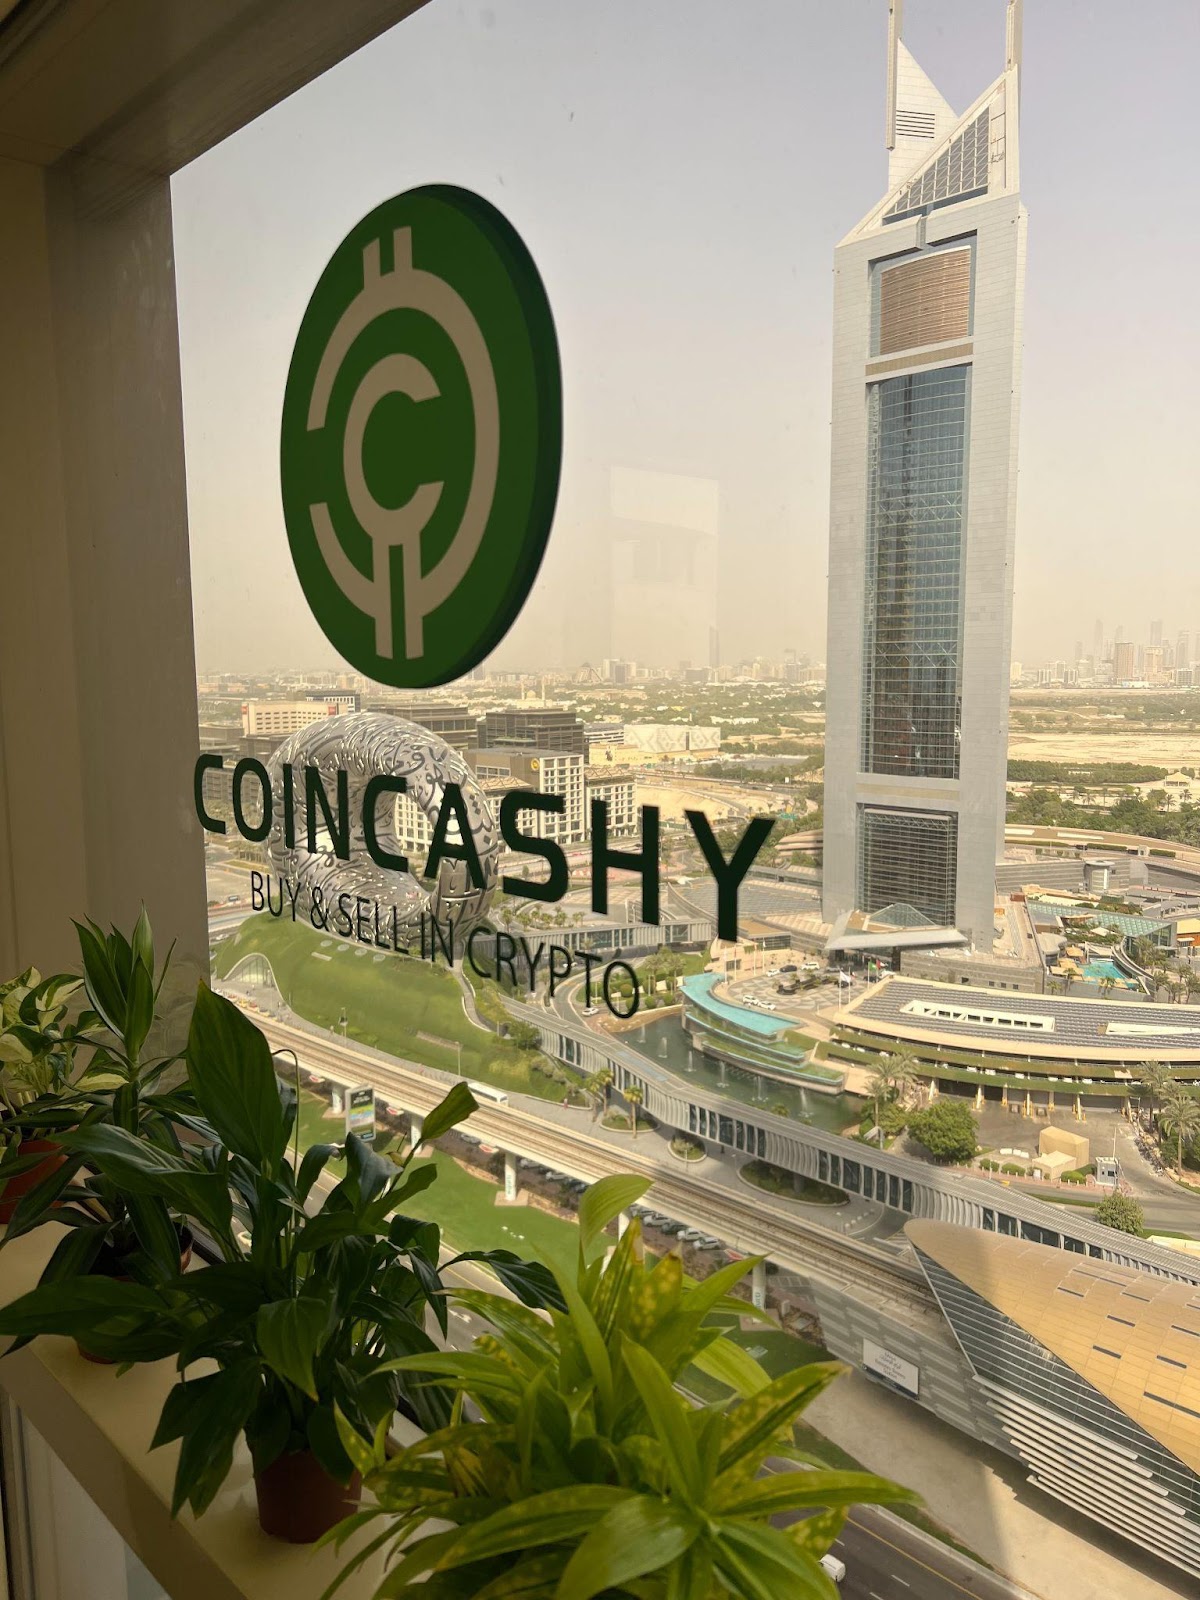 Coincashy Emerges as the Best Fiat to Crypto and Crypto to Fiat Exchange in the UAE